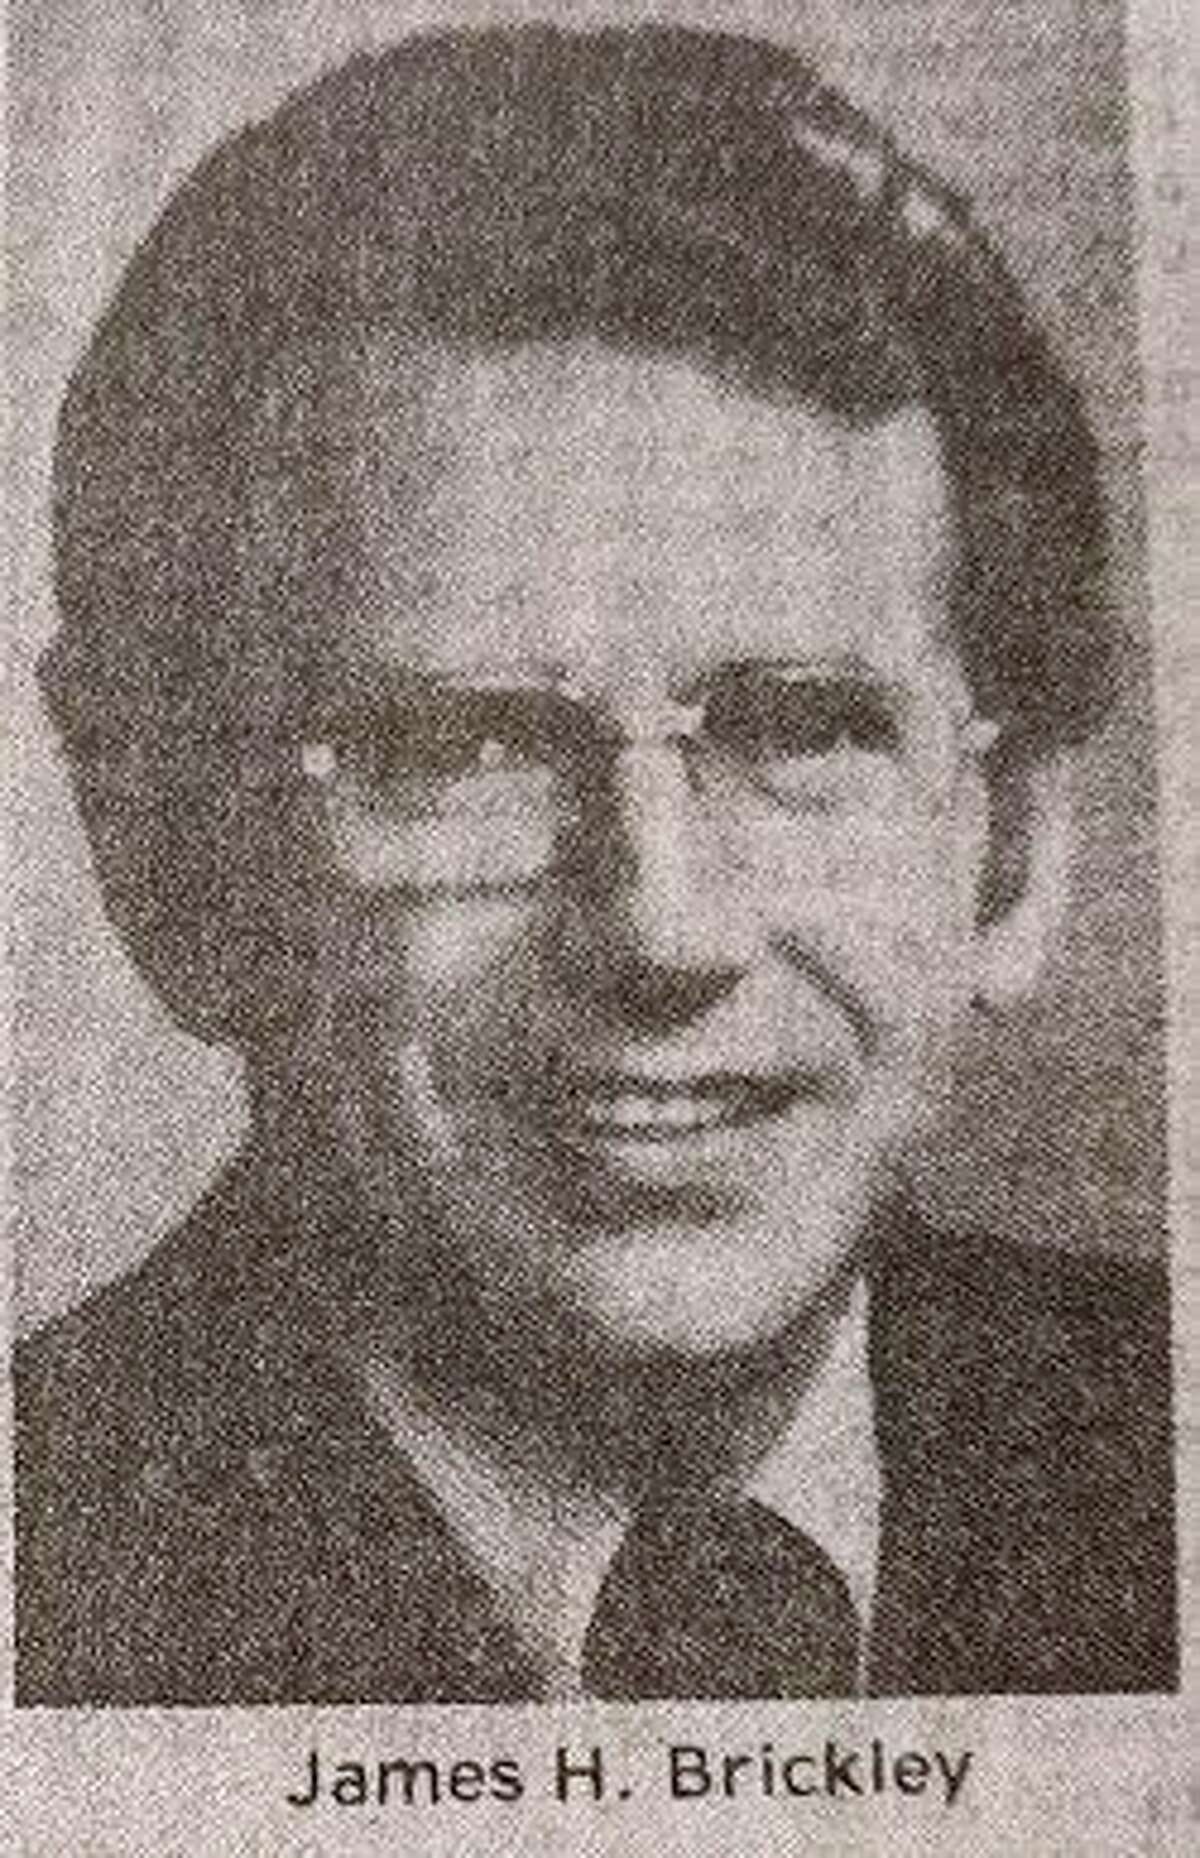 Pictured is James Brickley, president of Eastern Michigan University and at various times, Lieutenant Governor of Michigan. This picture was taken at the Honors Banquet Speaker in 1978. (Photo Provided)  